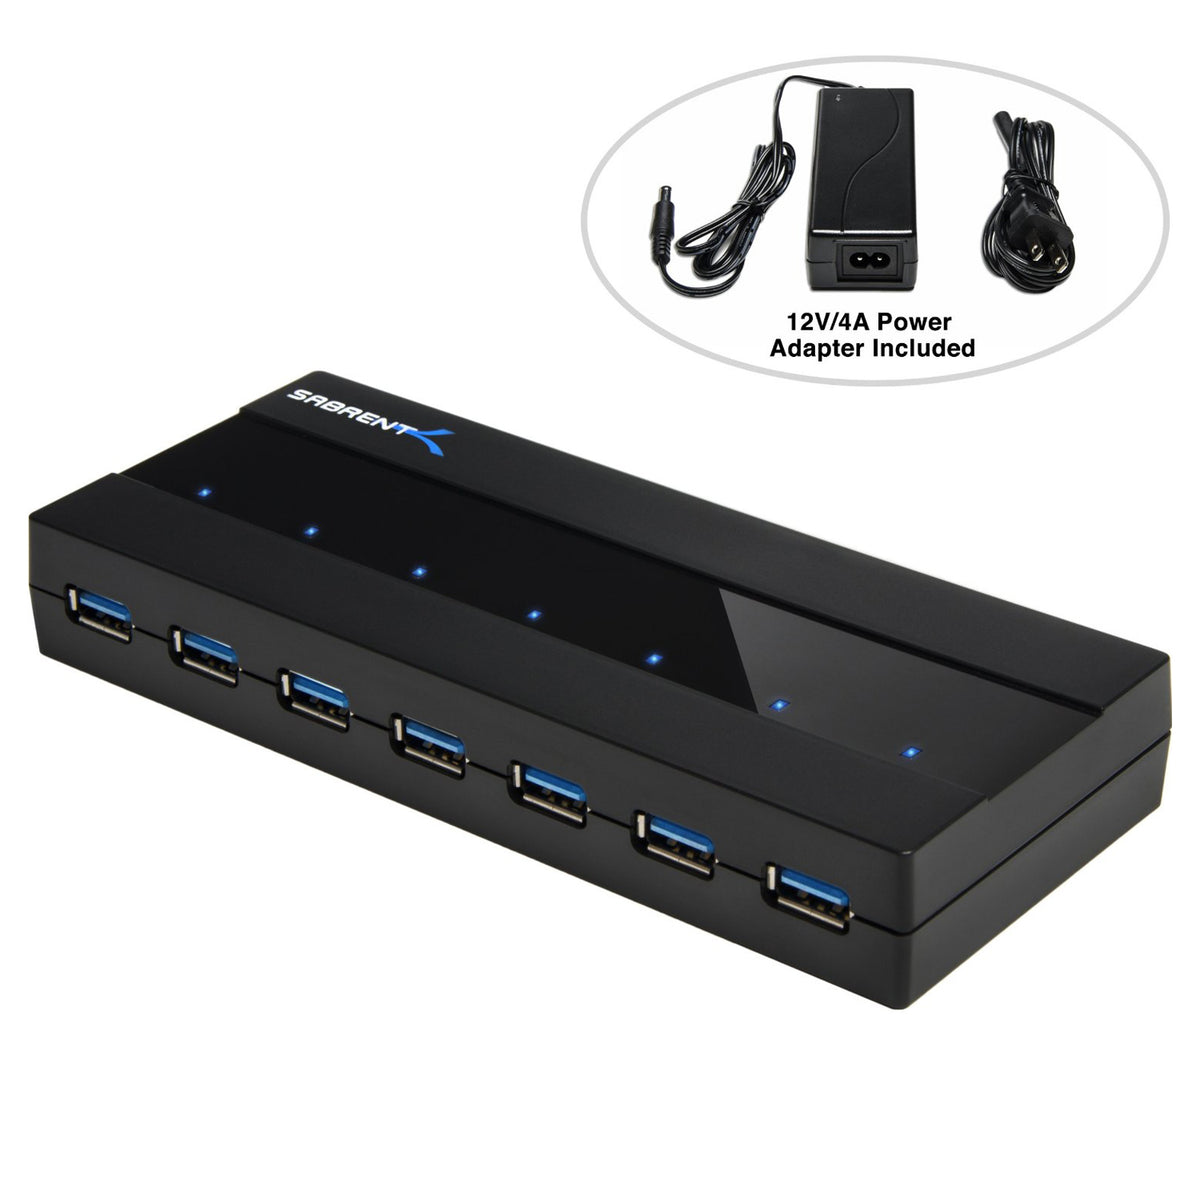 7 Port USB 3.0 Hub with 4A Power Adapter